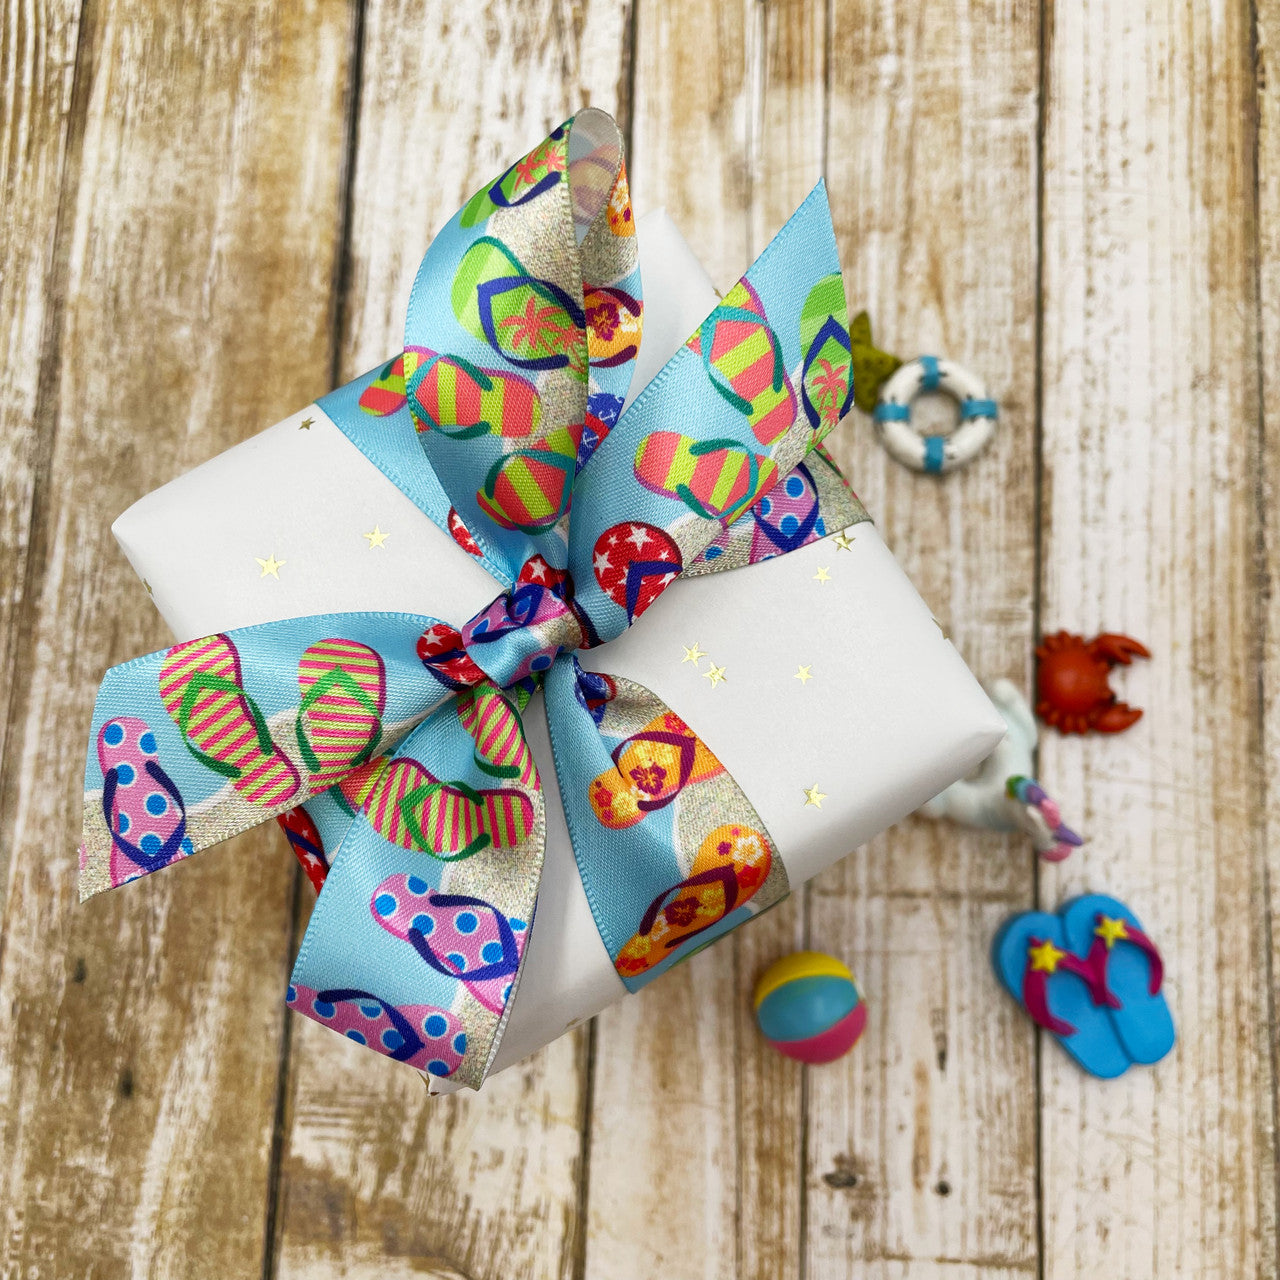 Tie a lovely little Summer themed gift with our beautiful flip flop ribbon for a whimsical presentation! 